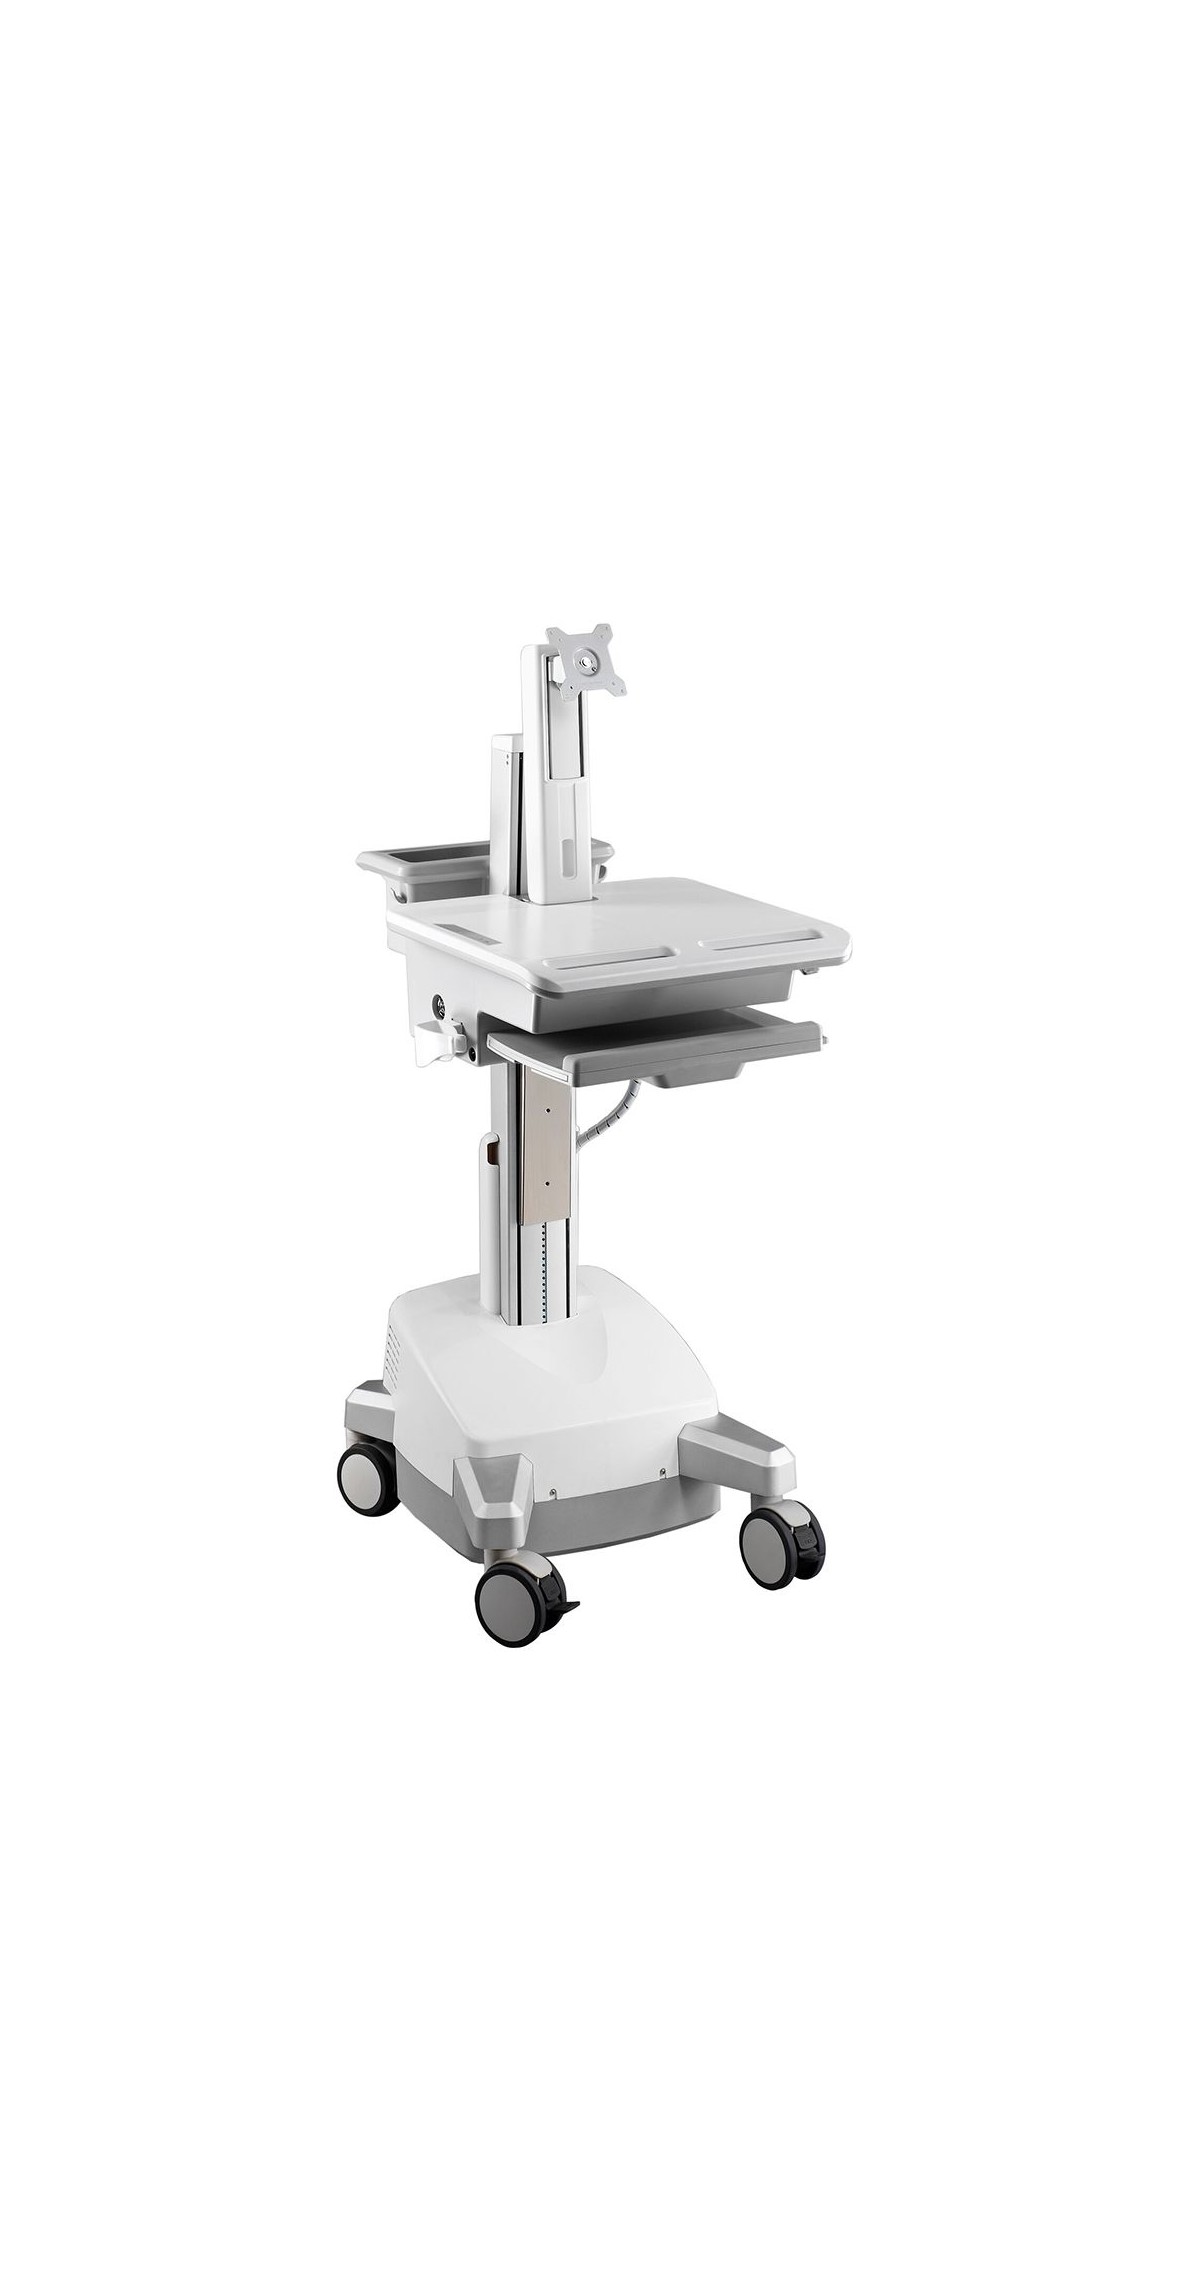 Aavara CEH01 Powered Mobile Medical Cart with e-LIFT - Single Monitor with height adjustment Type